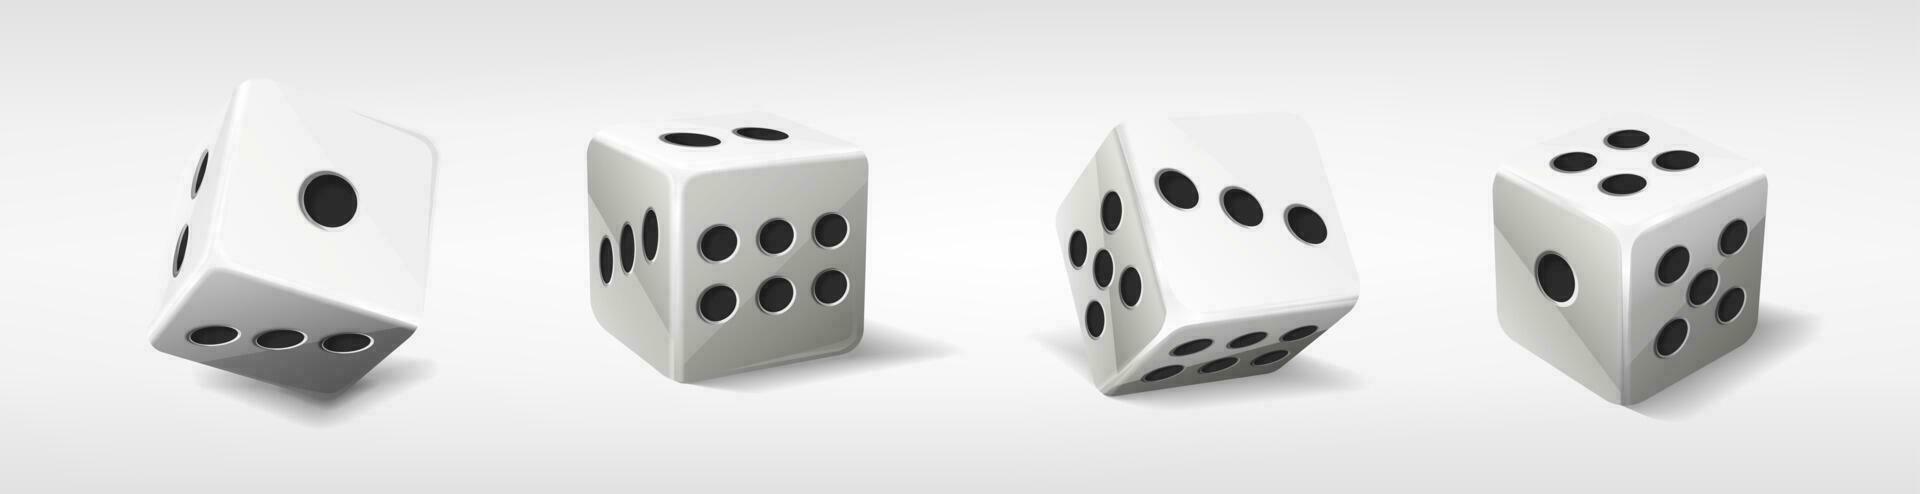 3d realistic vector icon illustration. White poker dice with random numbers. Isolated on white.